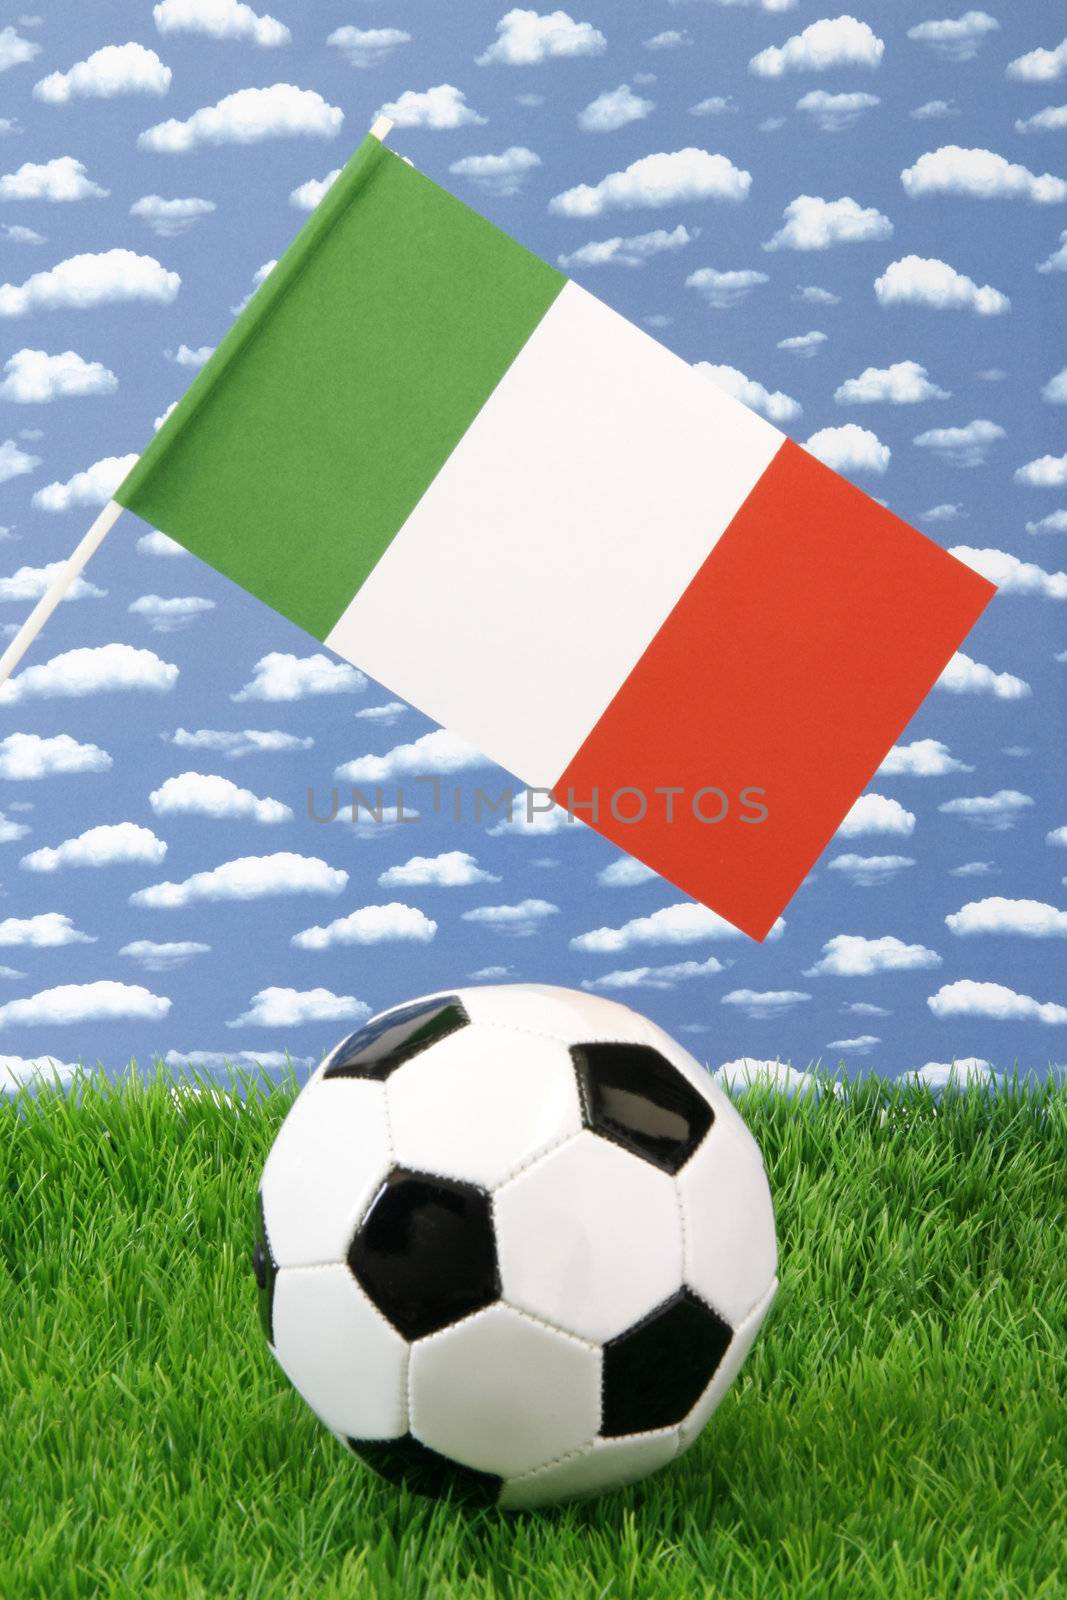 Soccerball on grass with italian national flag over sky background